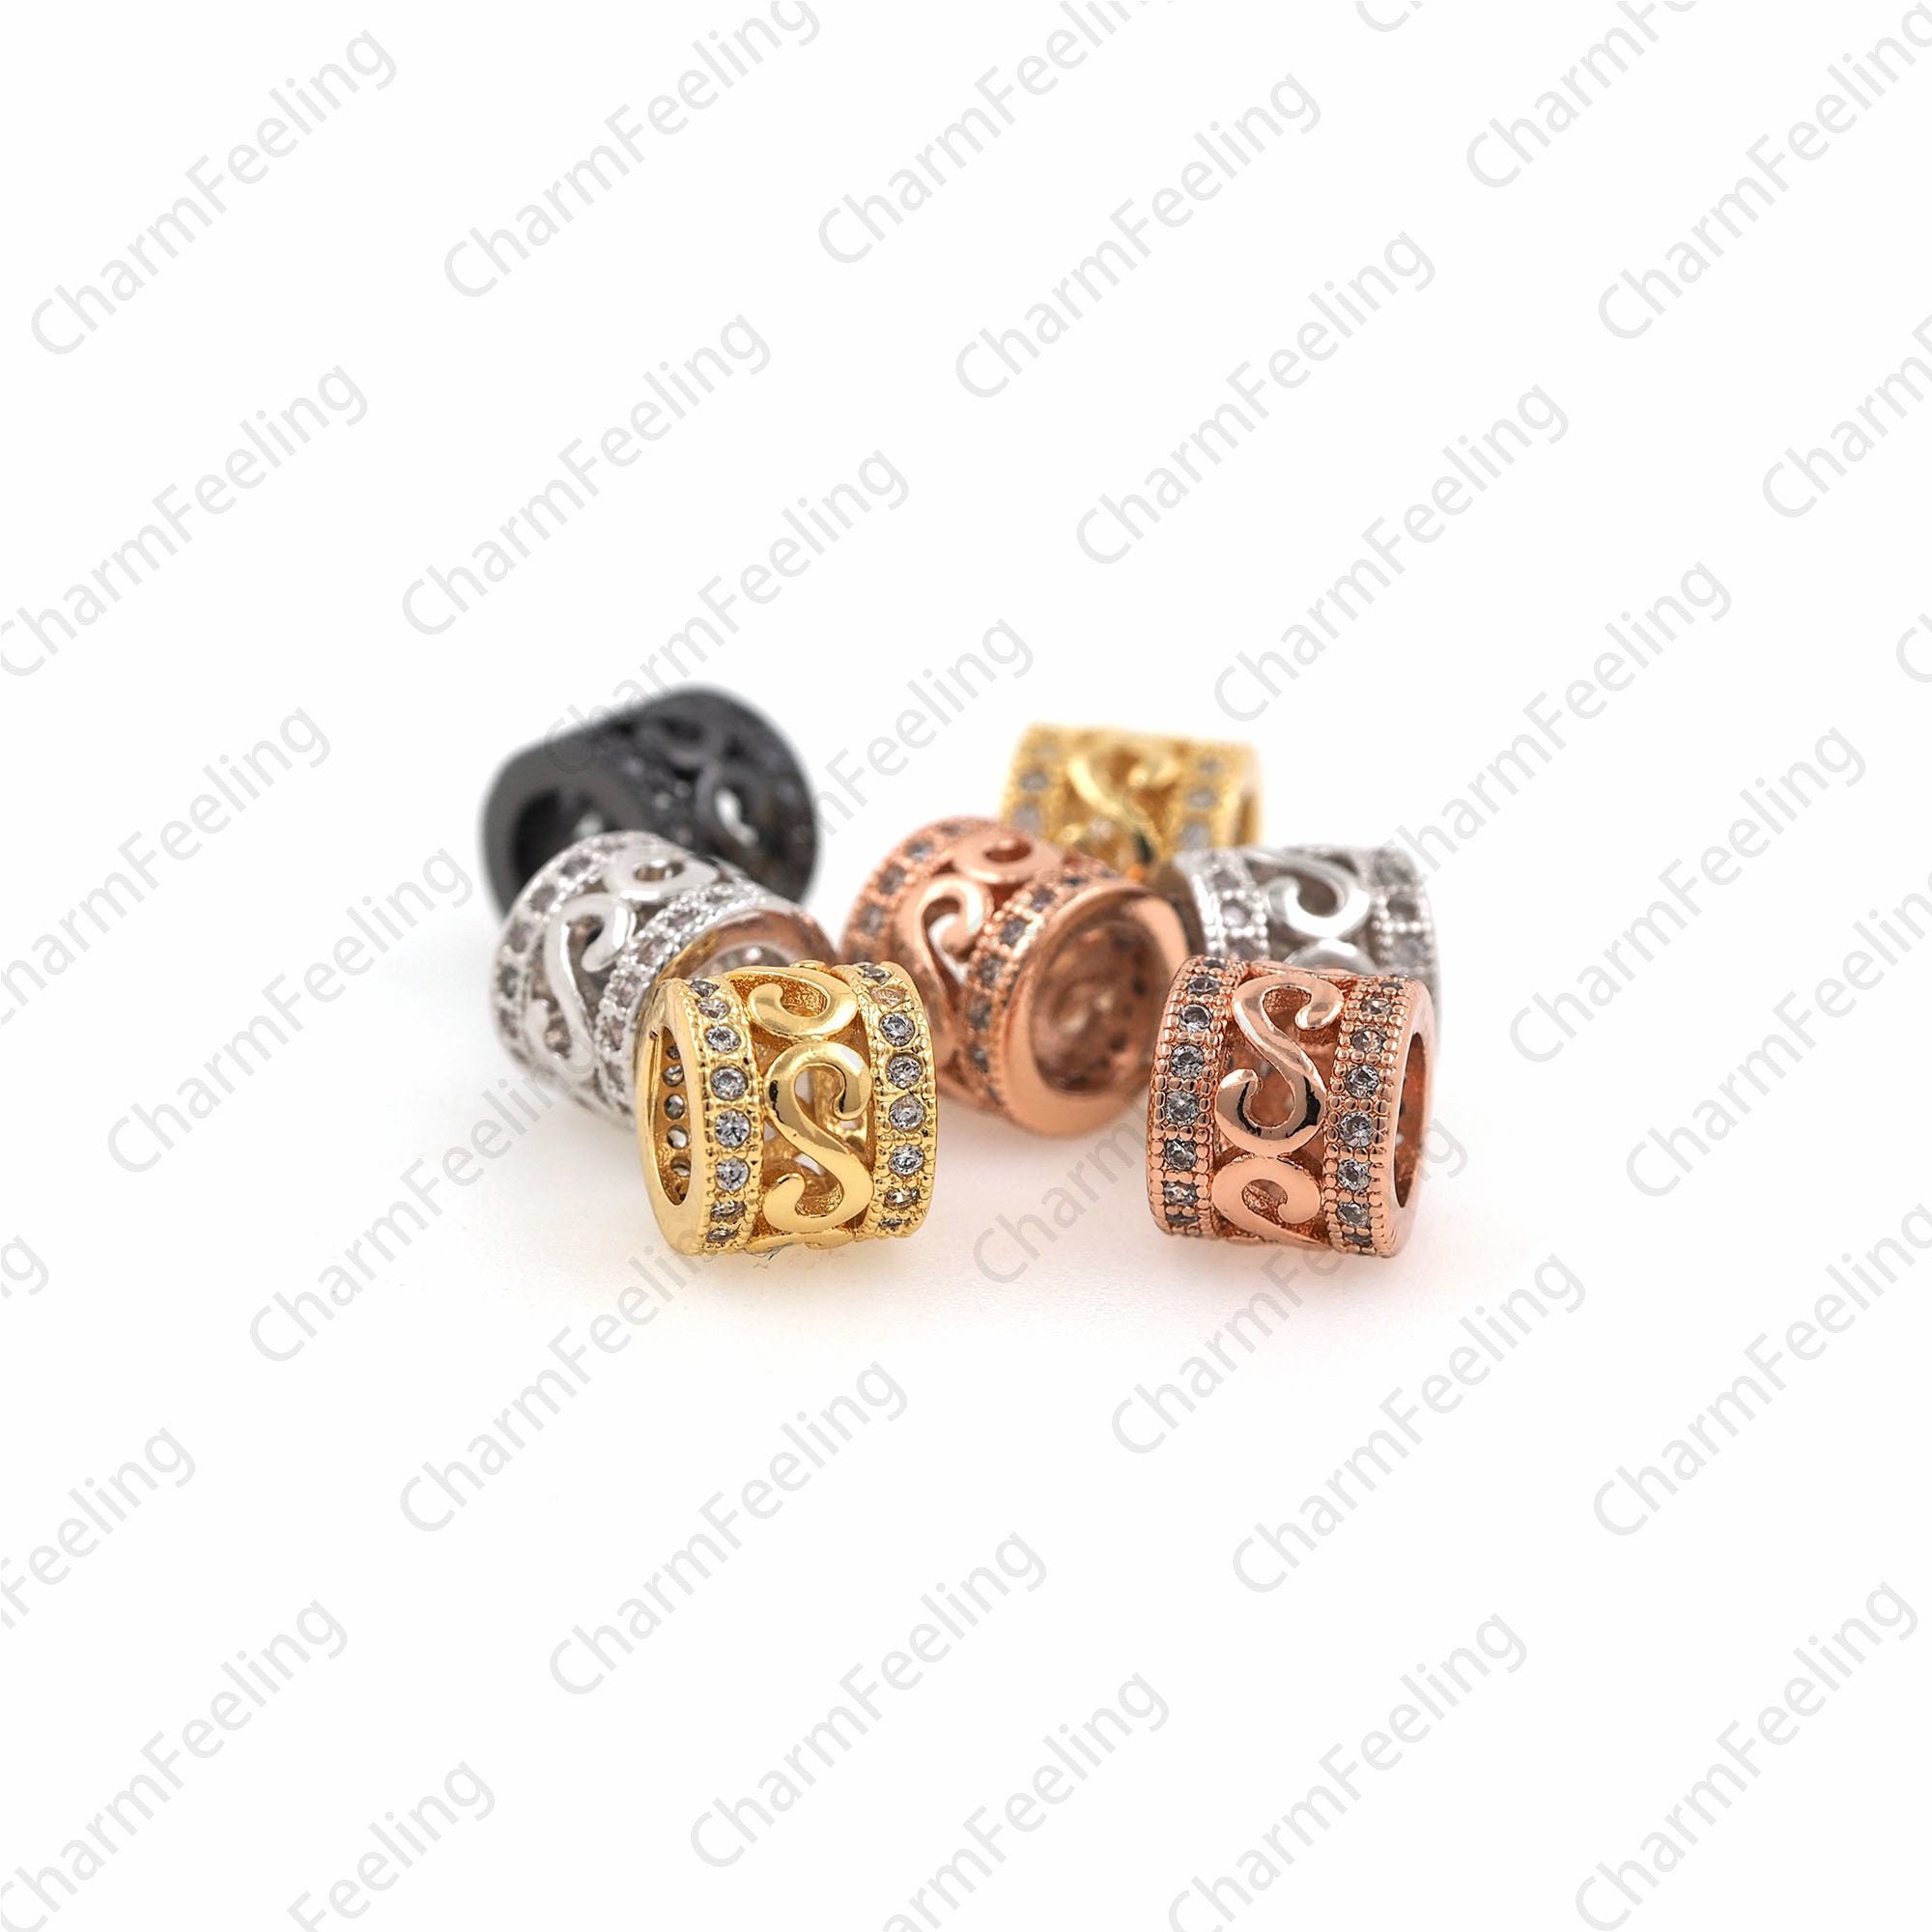 Cz Pattern Large Hole Beads, Barrel-Shaped Spacer Metal Tube, S Symbol Diy Beaded Accessories 78mm Hole 5mm 1Pcs